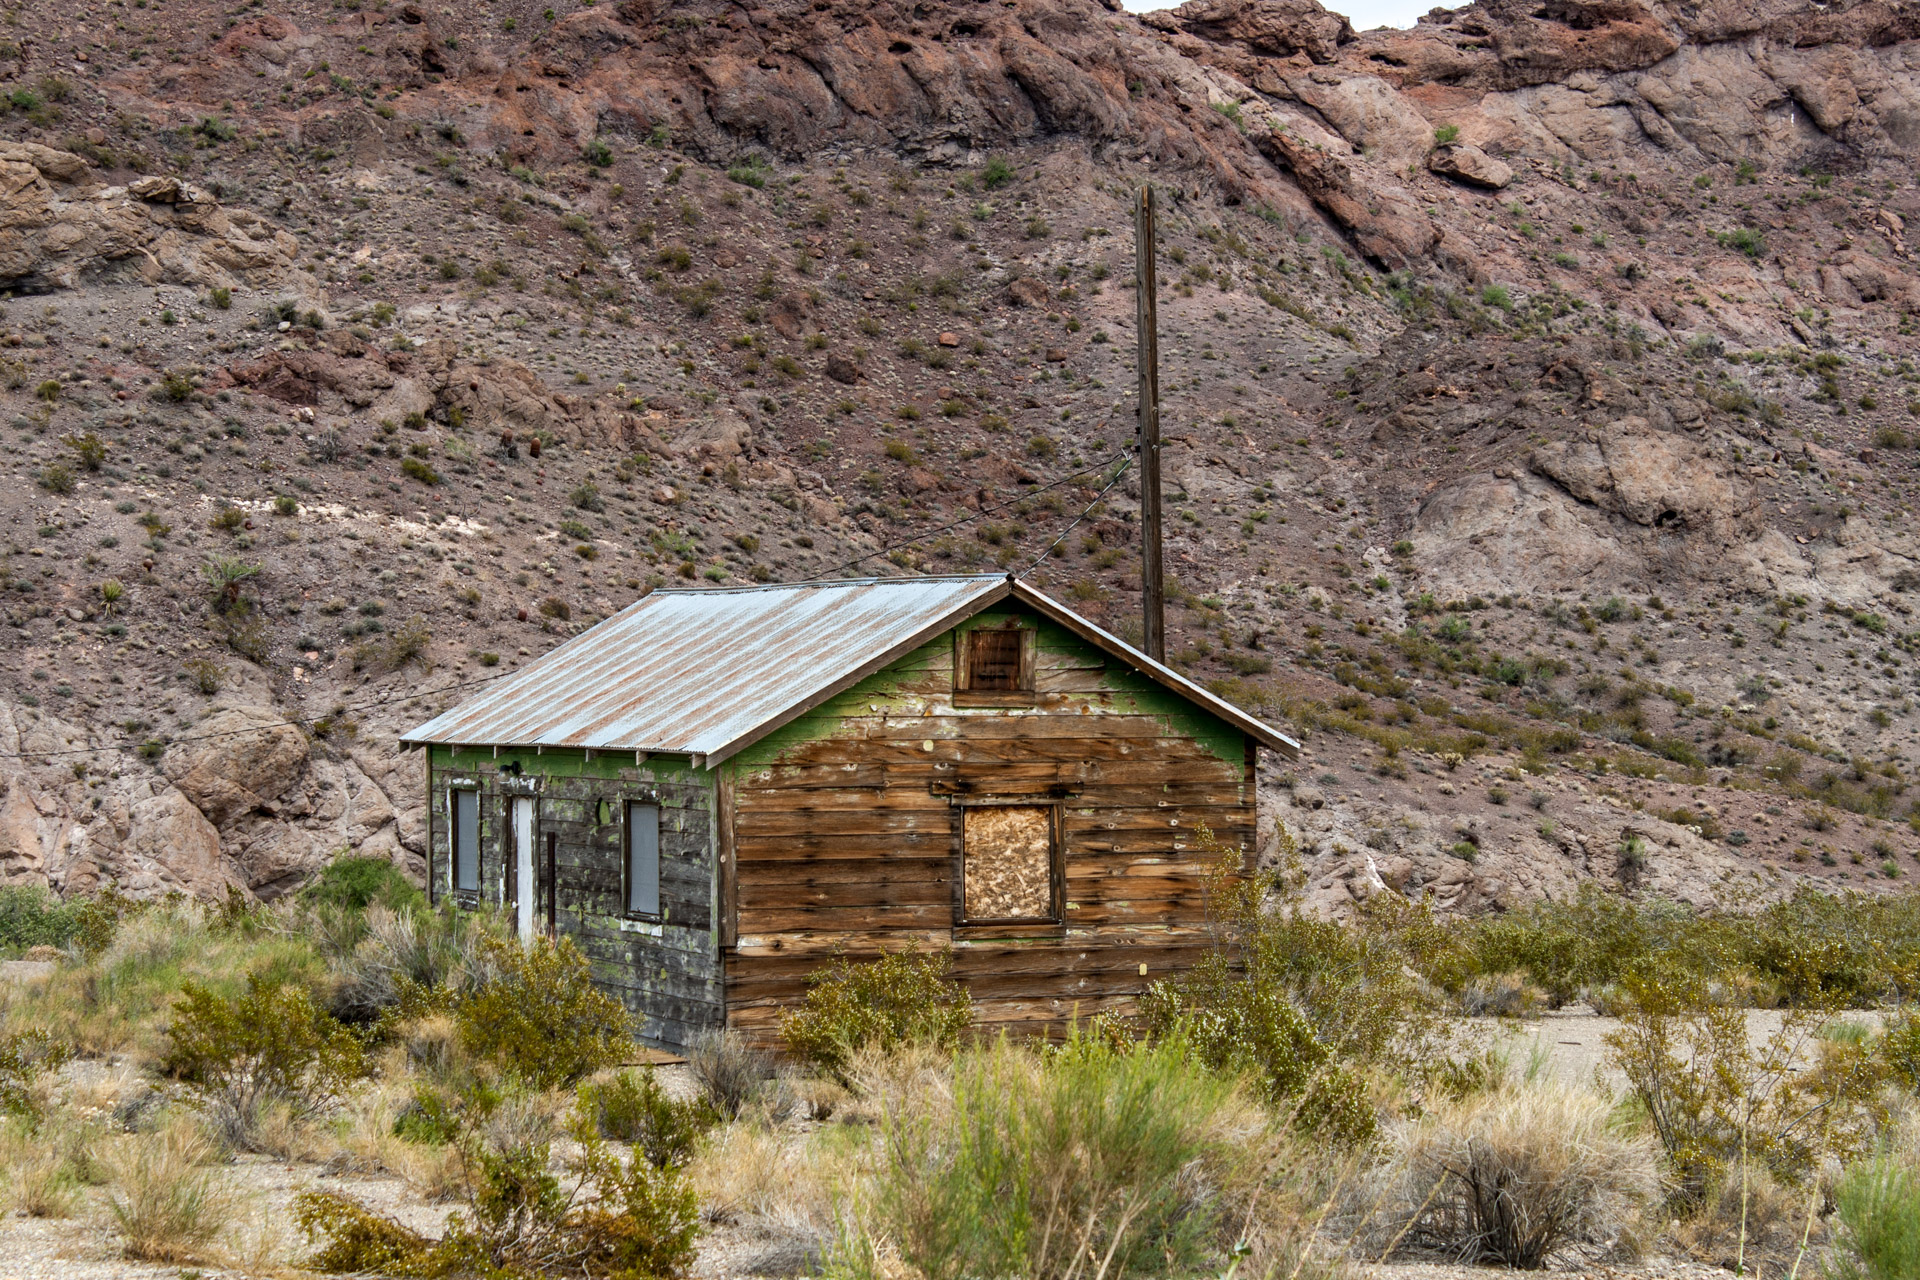 Nelson, Nevada - A Weathered Mining Town House (close)